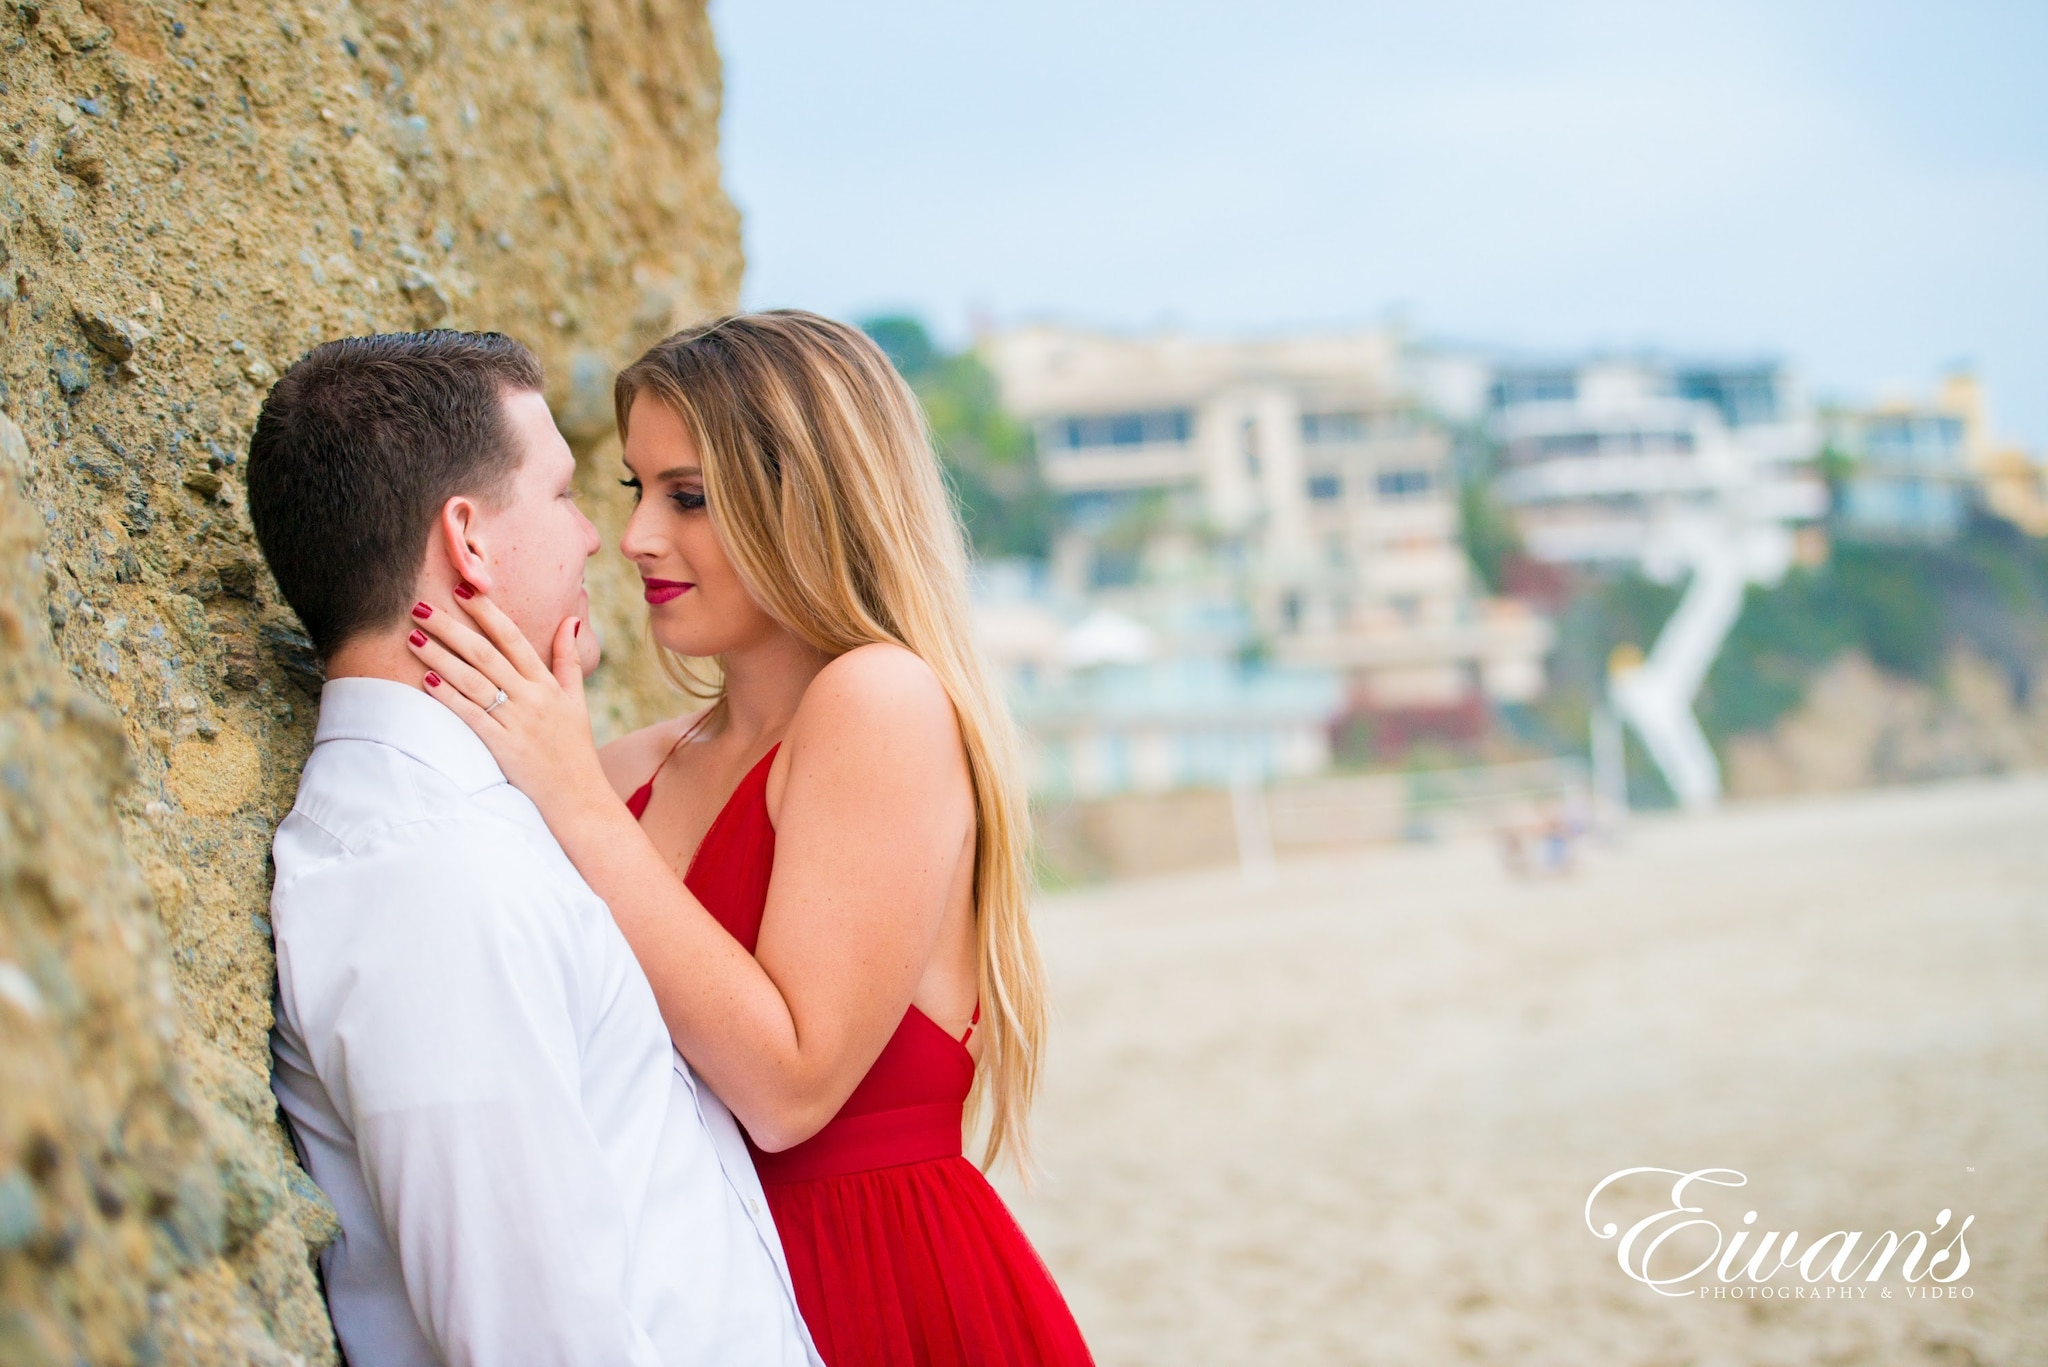 Engagement Photos At The Beach 001